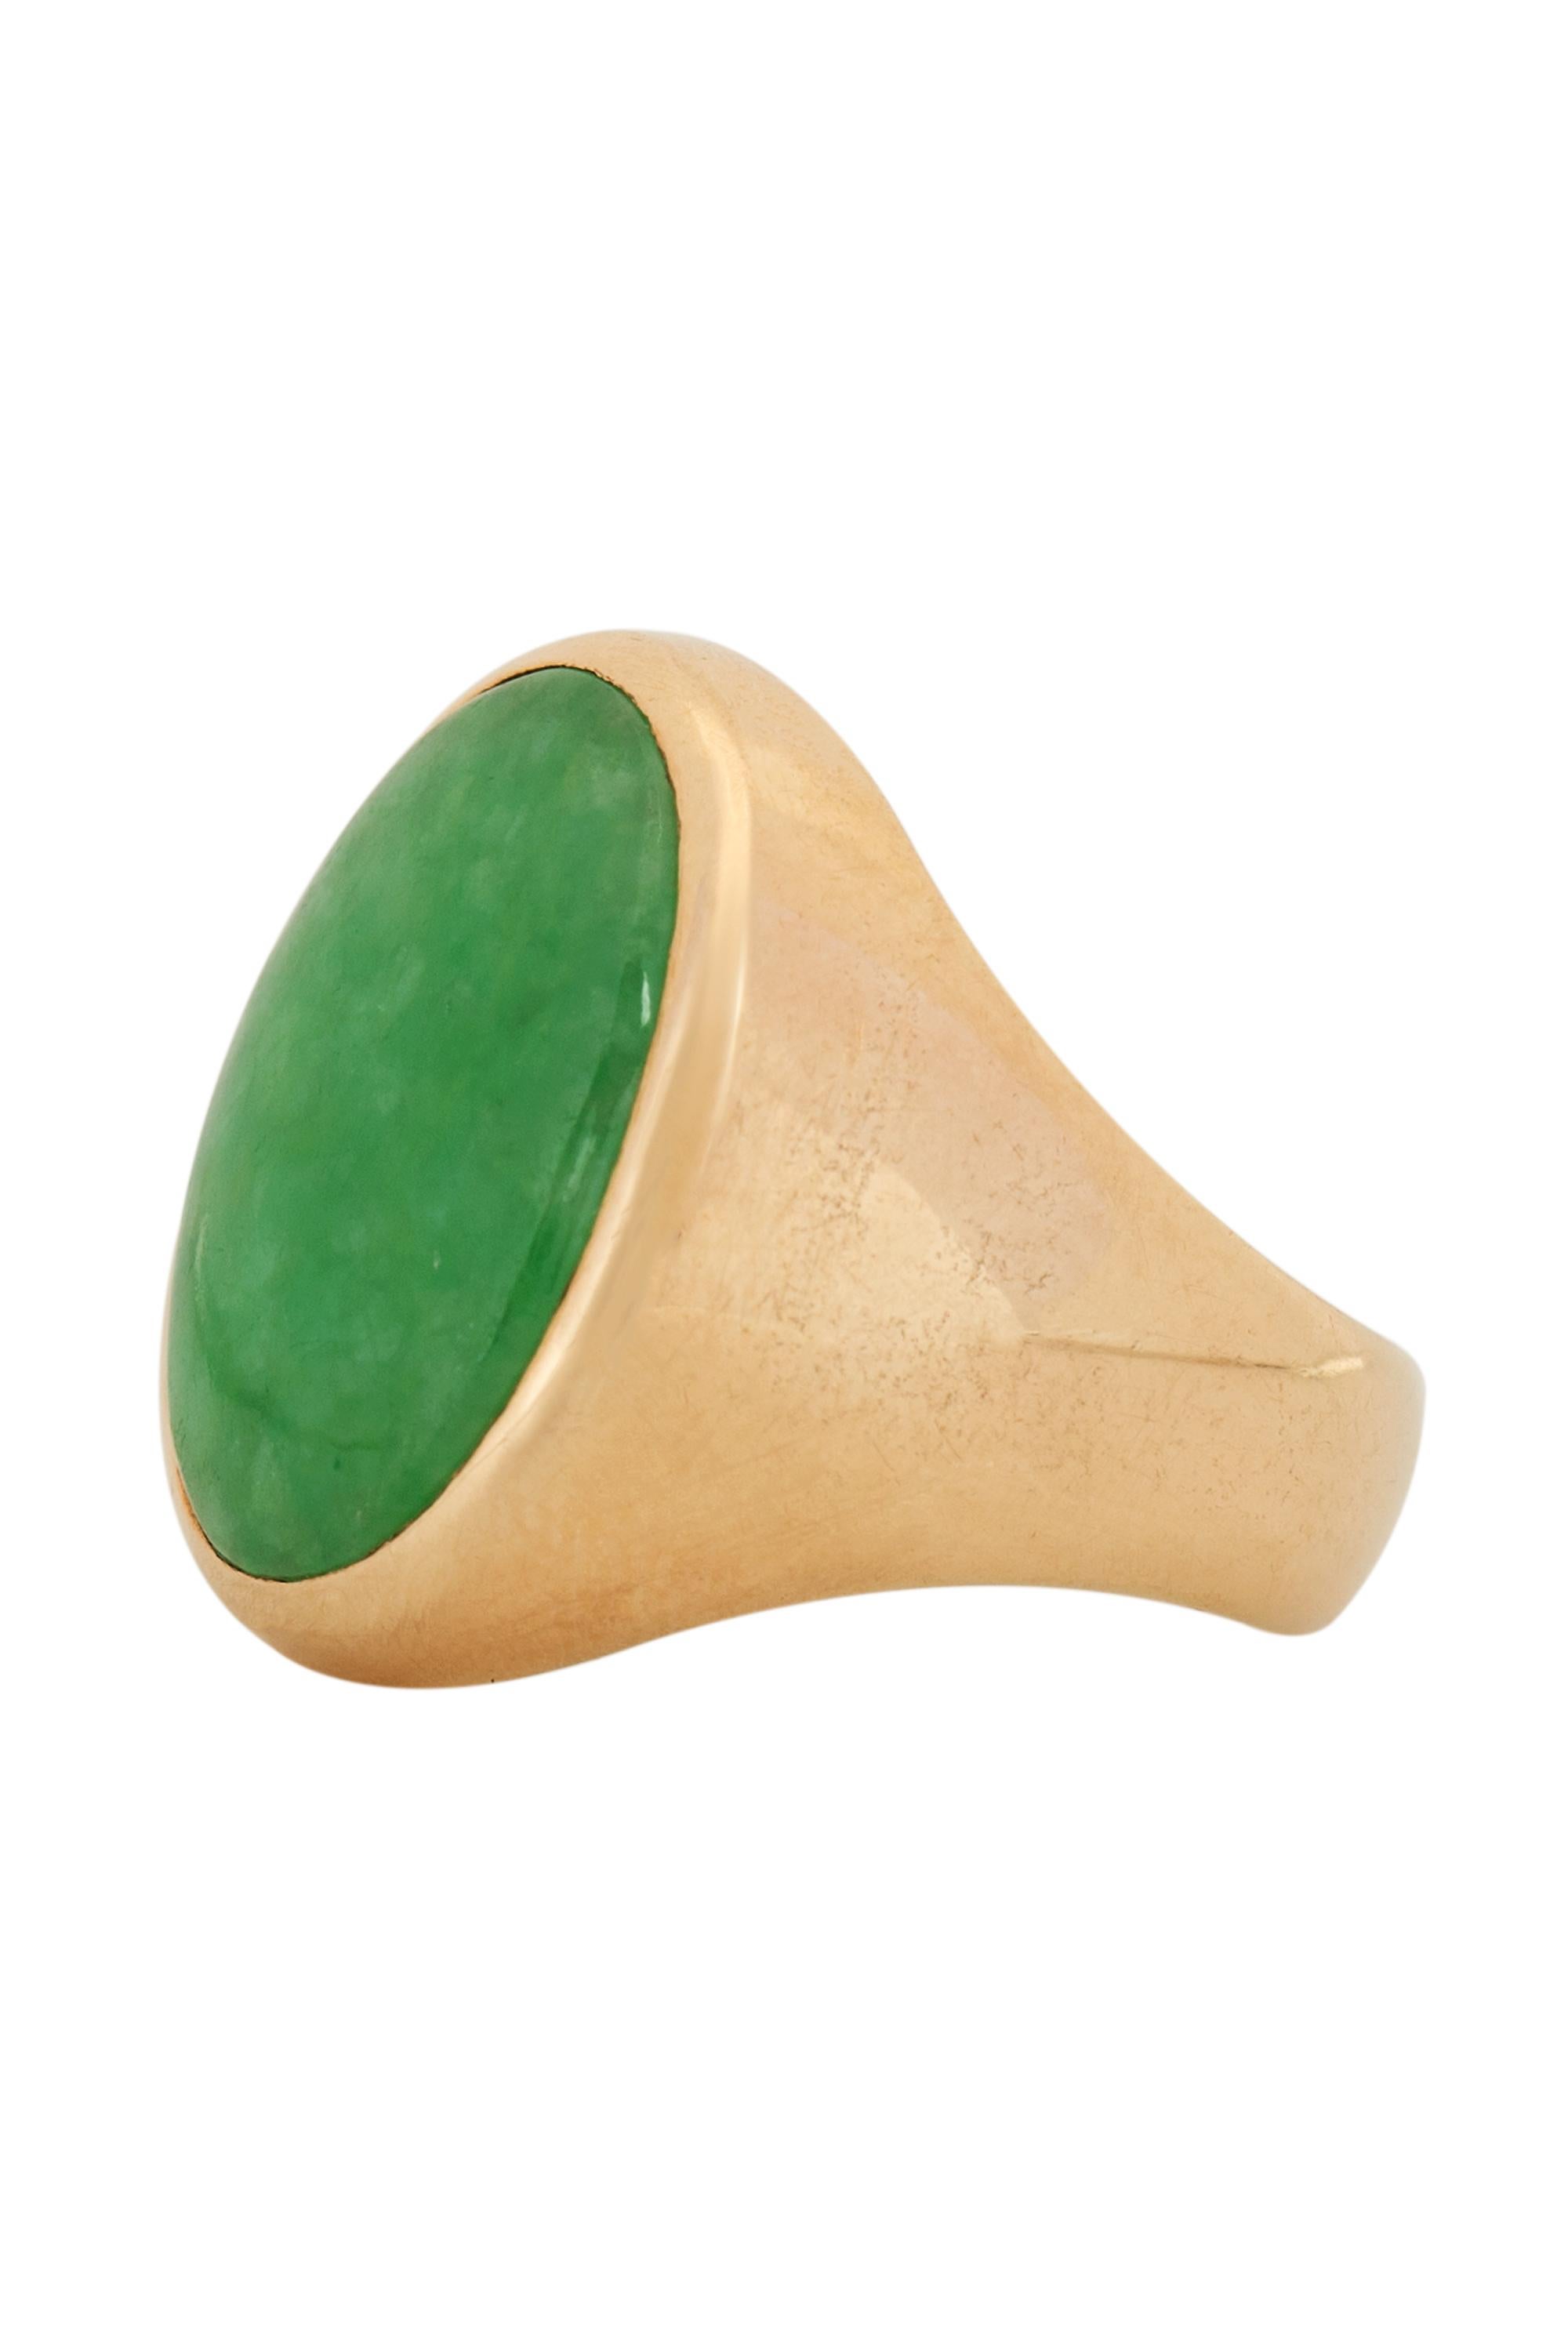 This discerning ring features a bright semi translucent oval of richly mottled green jadeite jade elegantly enhanced by a classic frame of 14 karat yellow gold. Current ring size 7 ½ and may be resized.